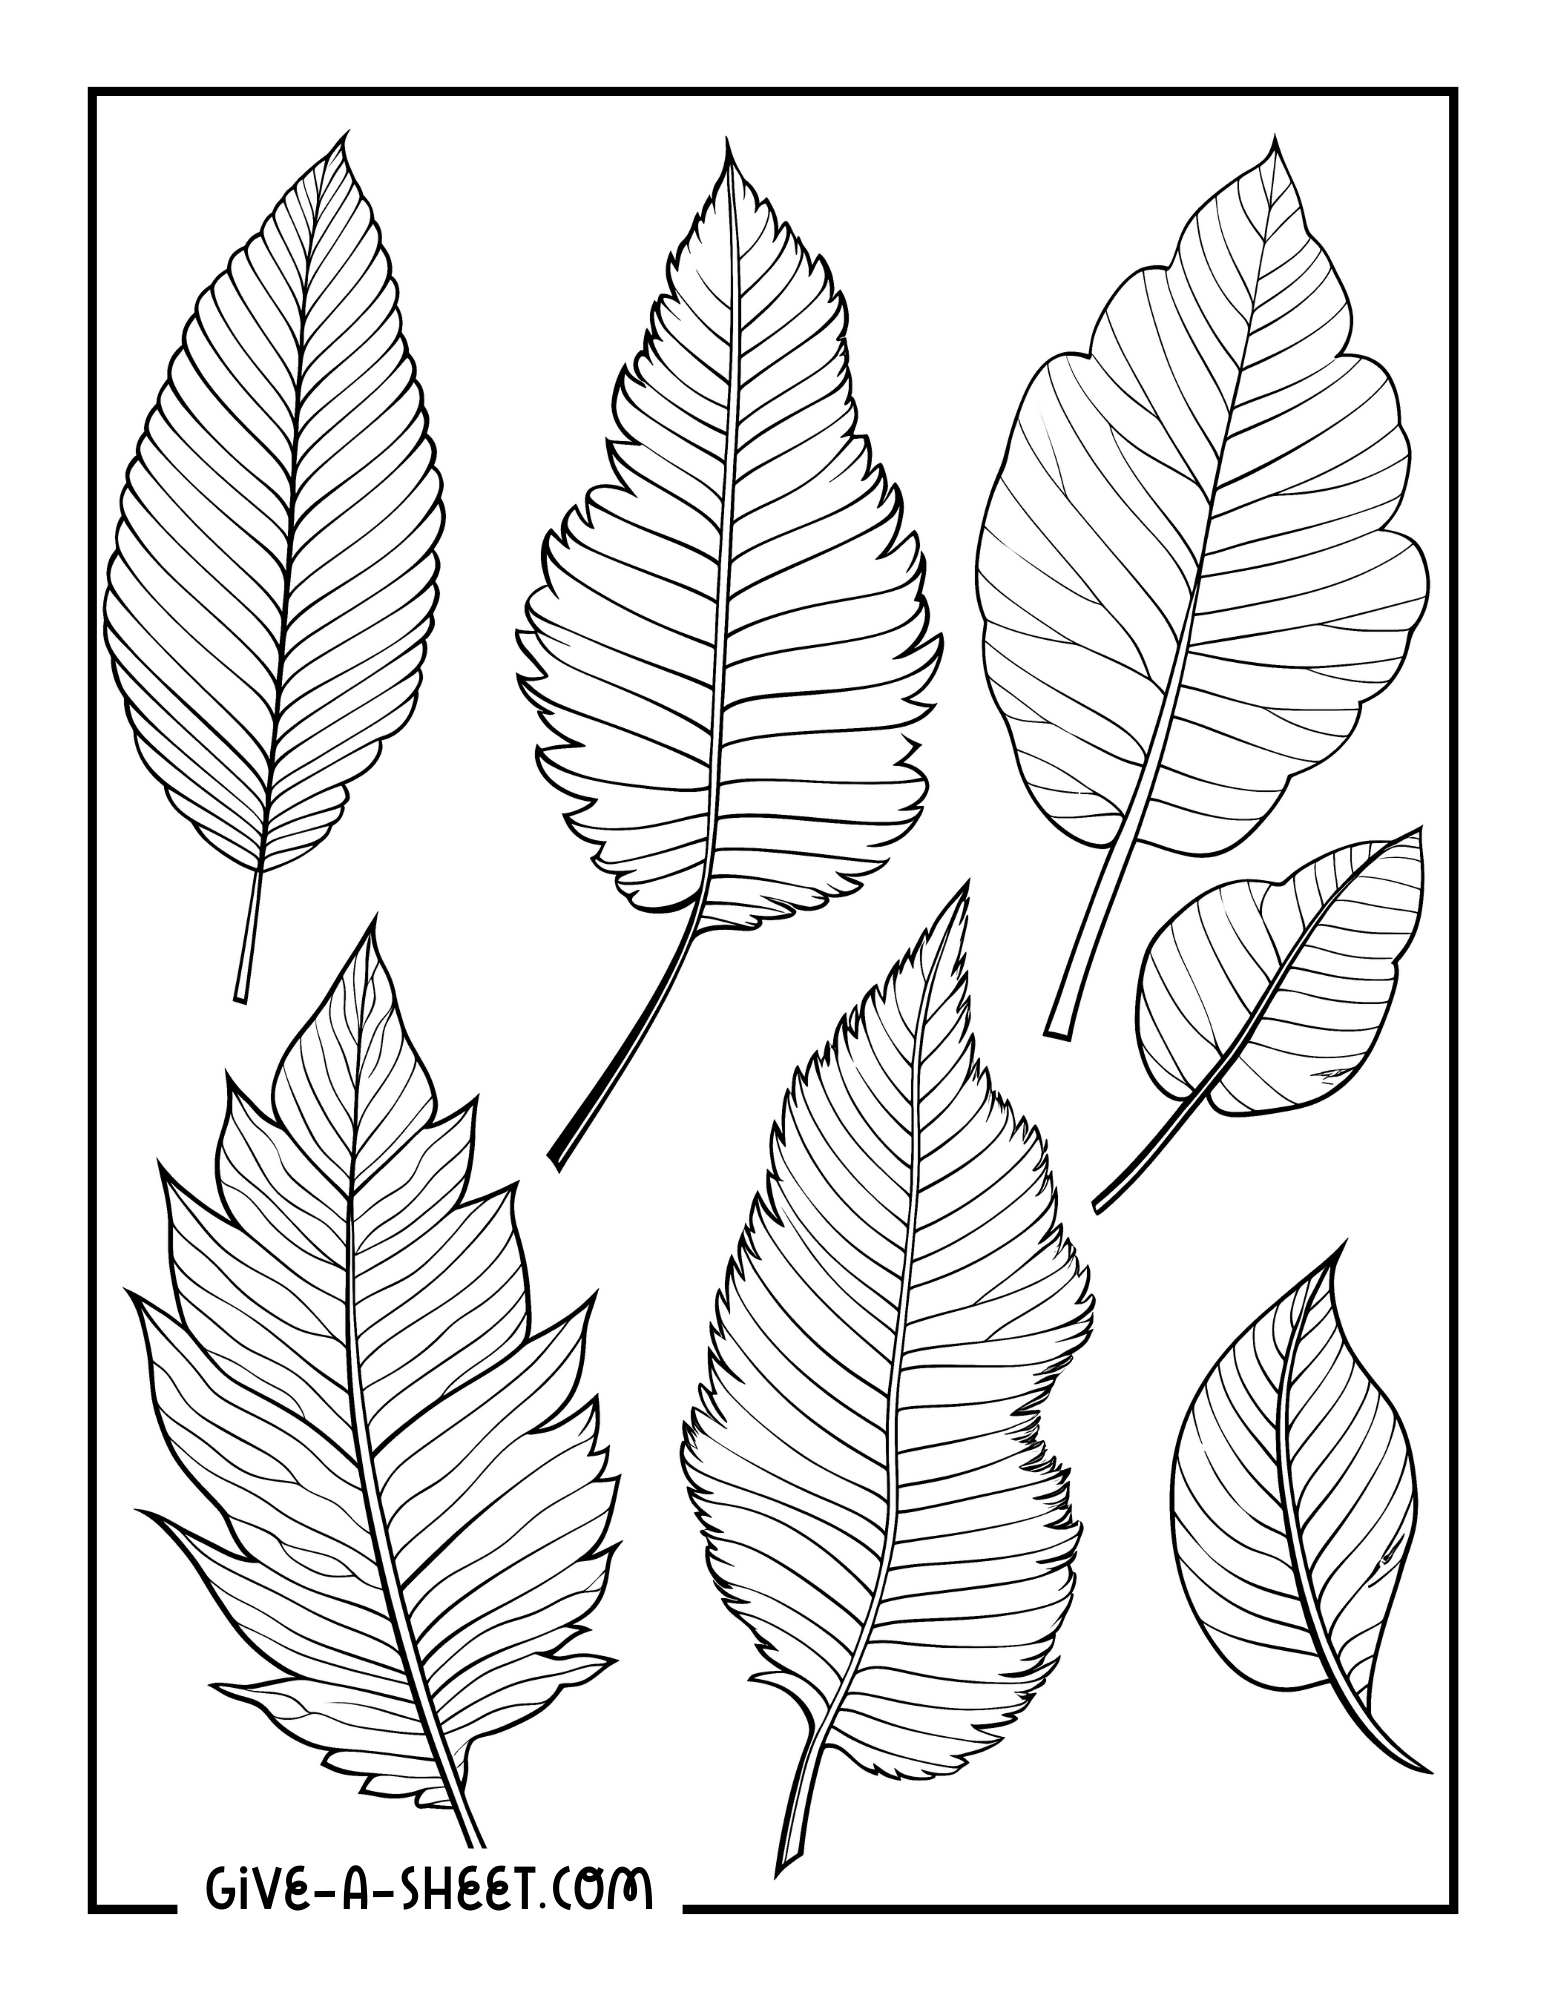 Realistic leaves for fall season coloring page.